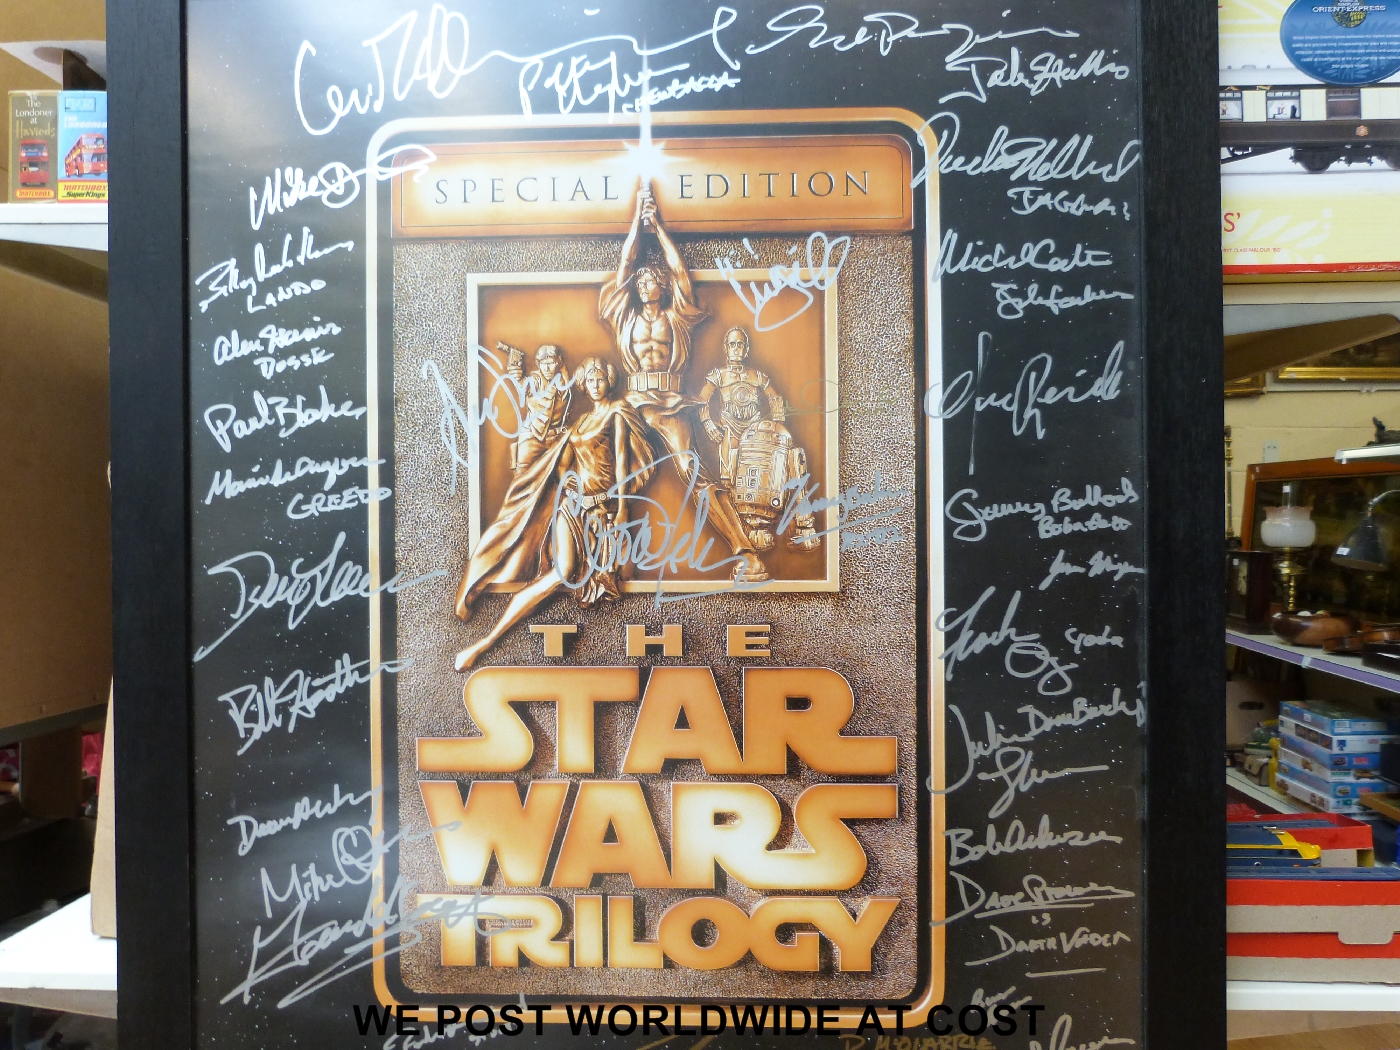 Star wars 1996 special edition gold ingot original movie poster for the Star Wars Trilogy hand